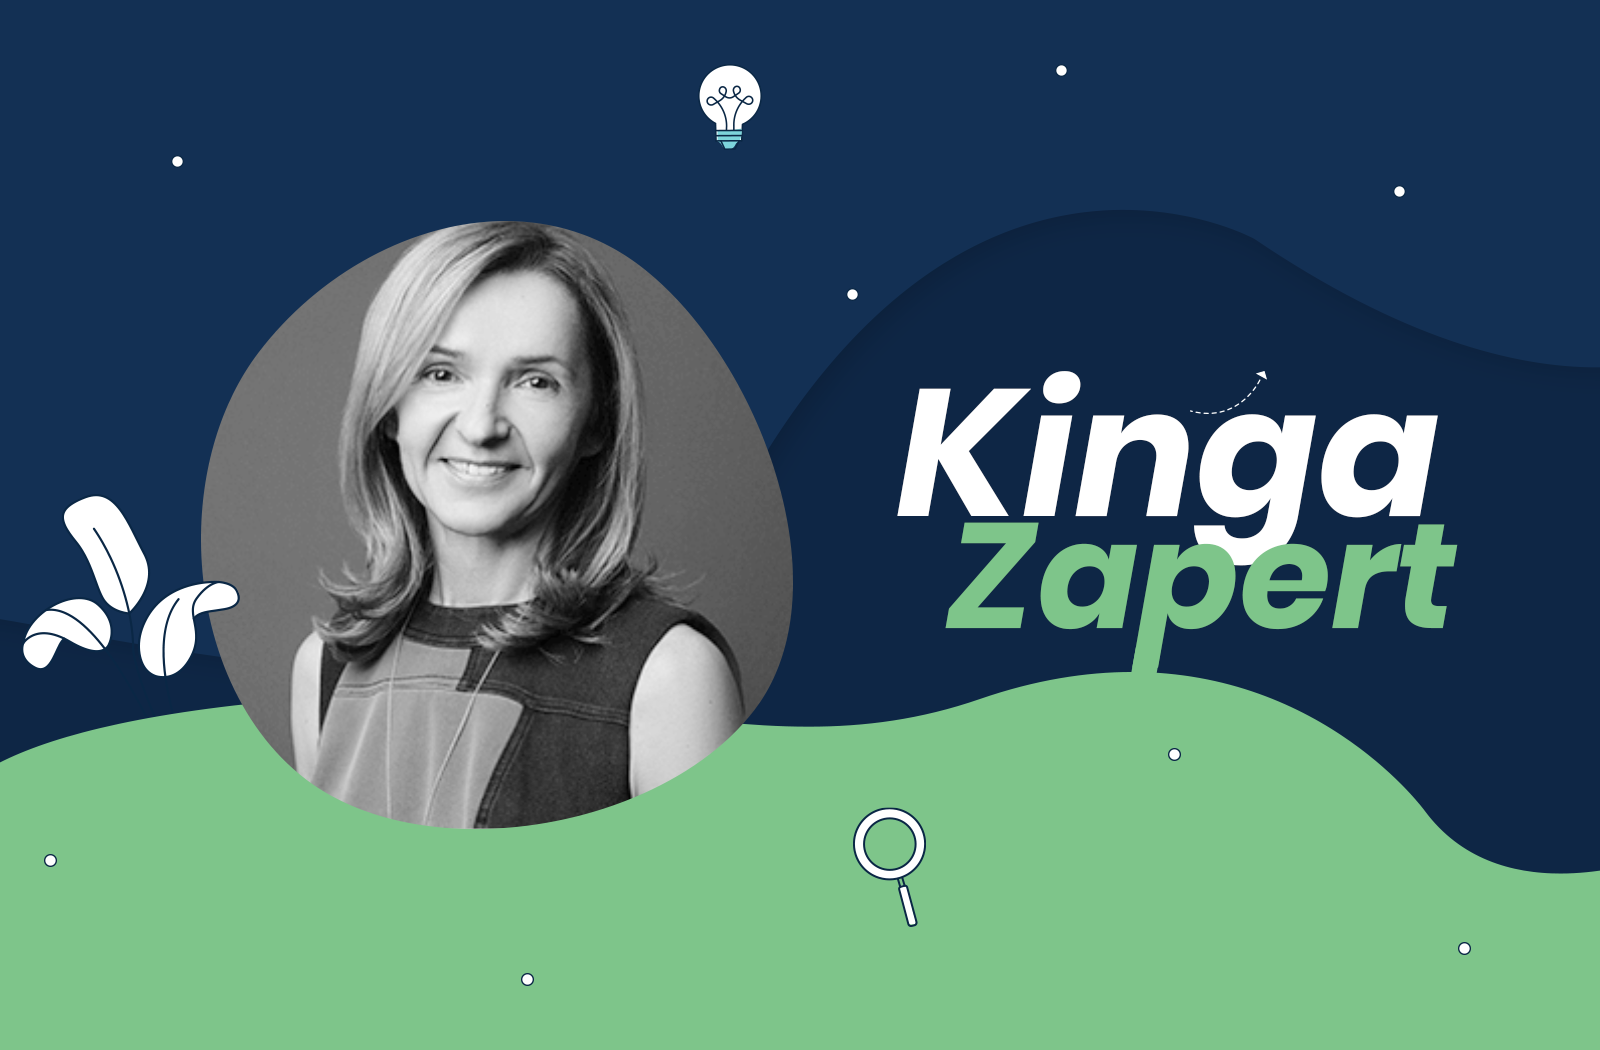 Principal Kinga Zapert on the Importance of Combining Research Skills with Life Sciences Expertise